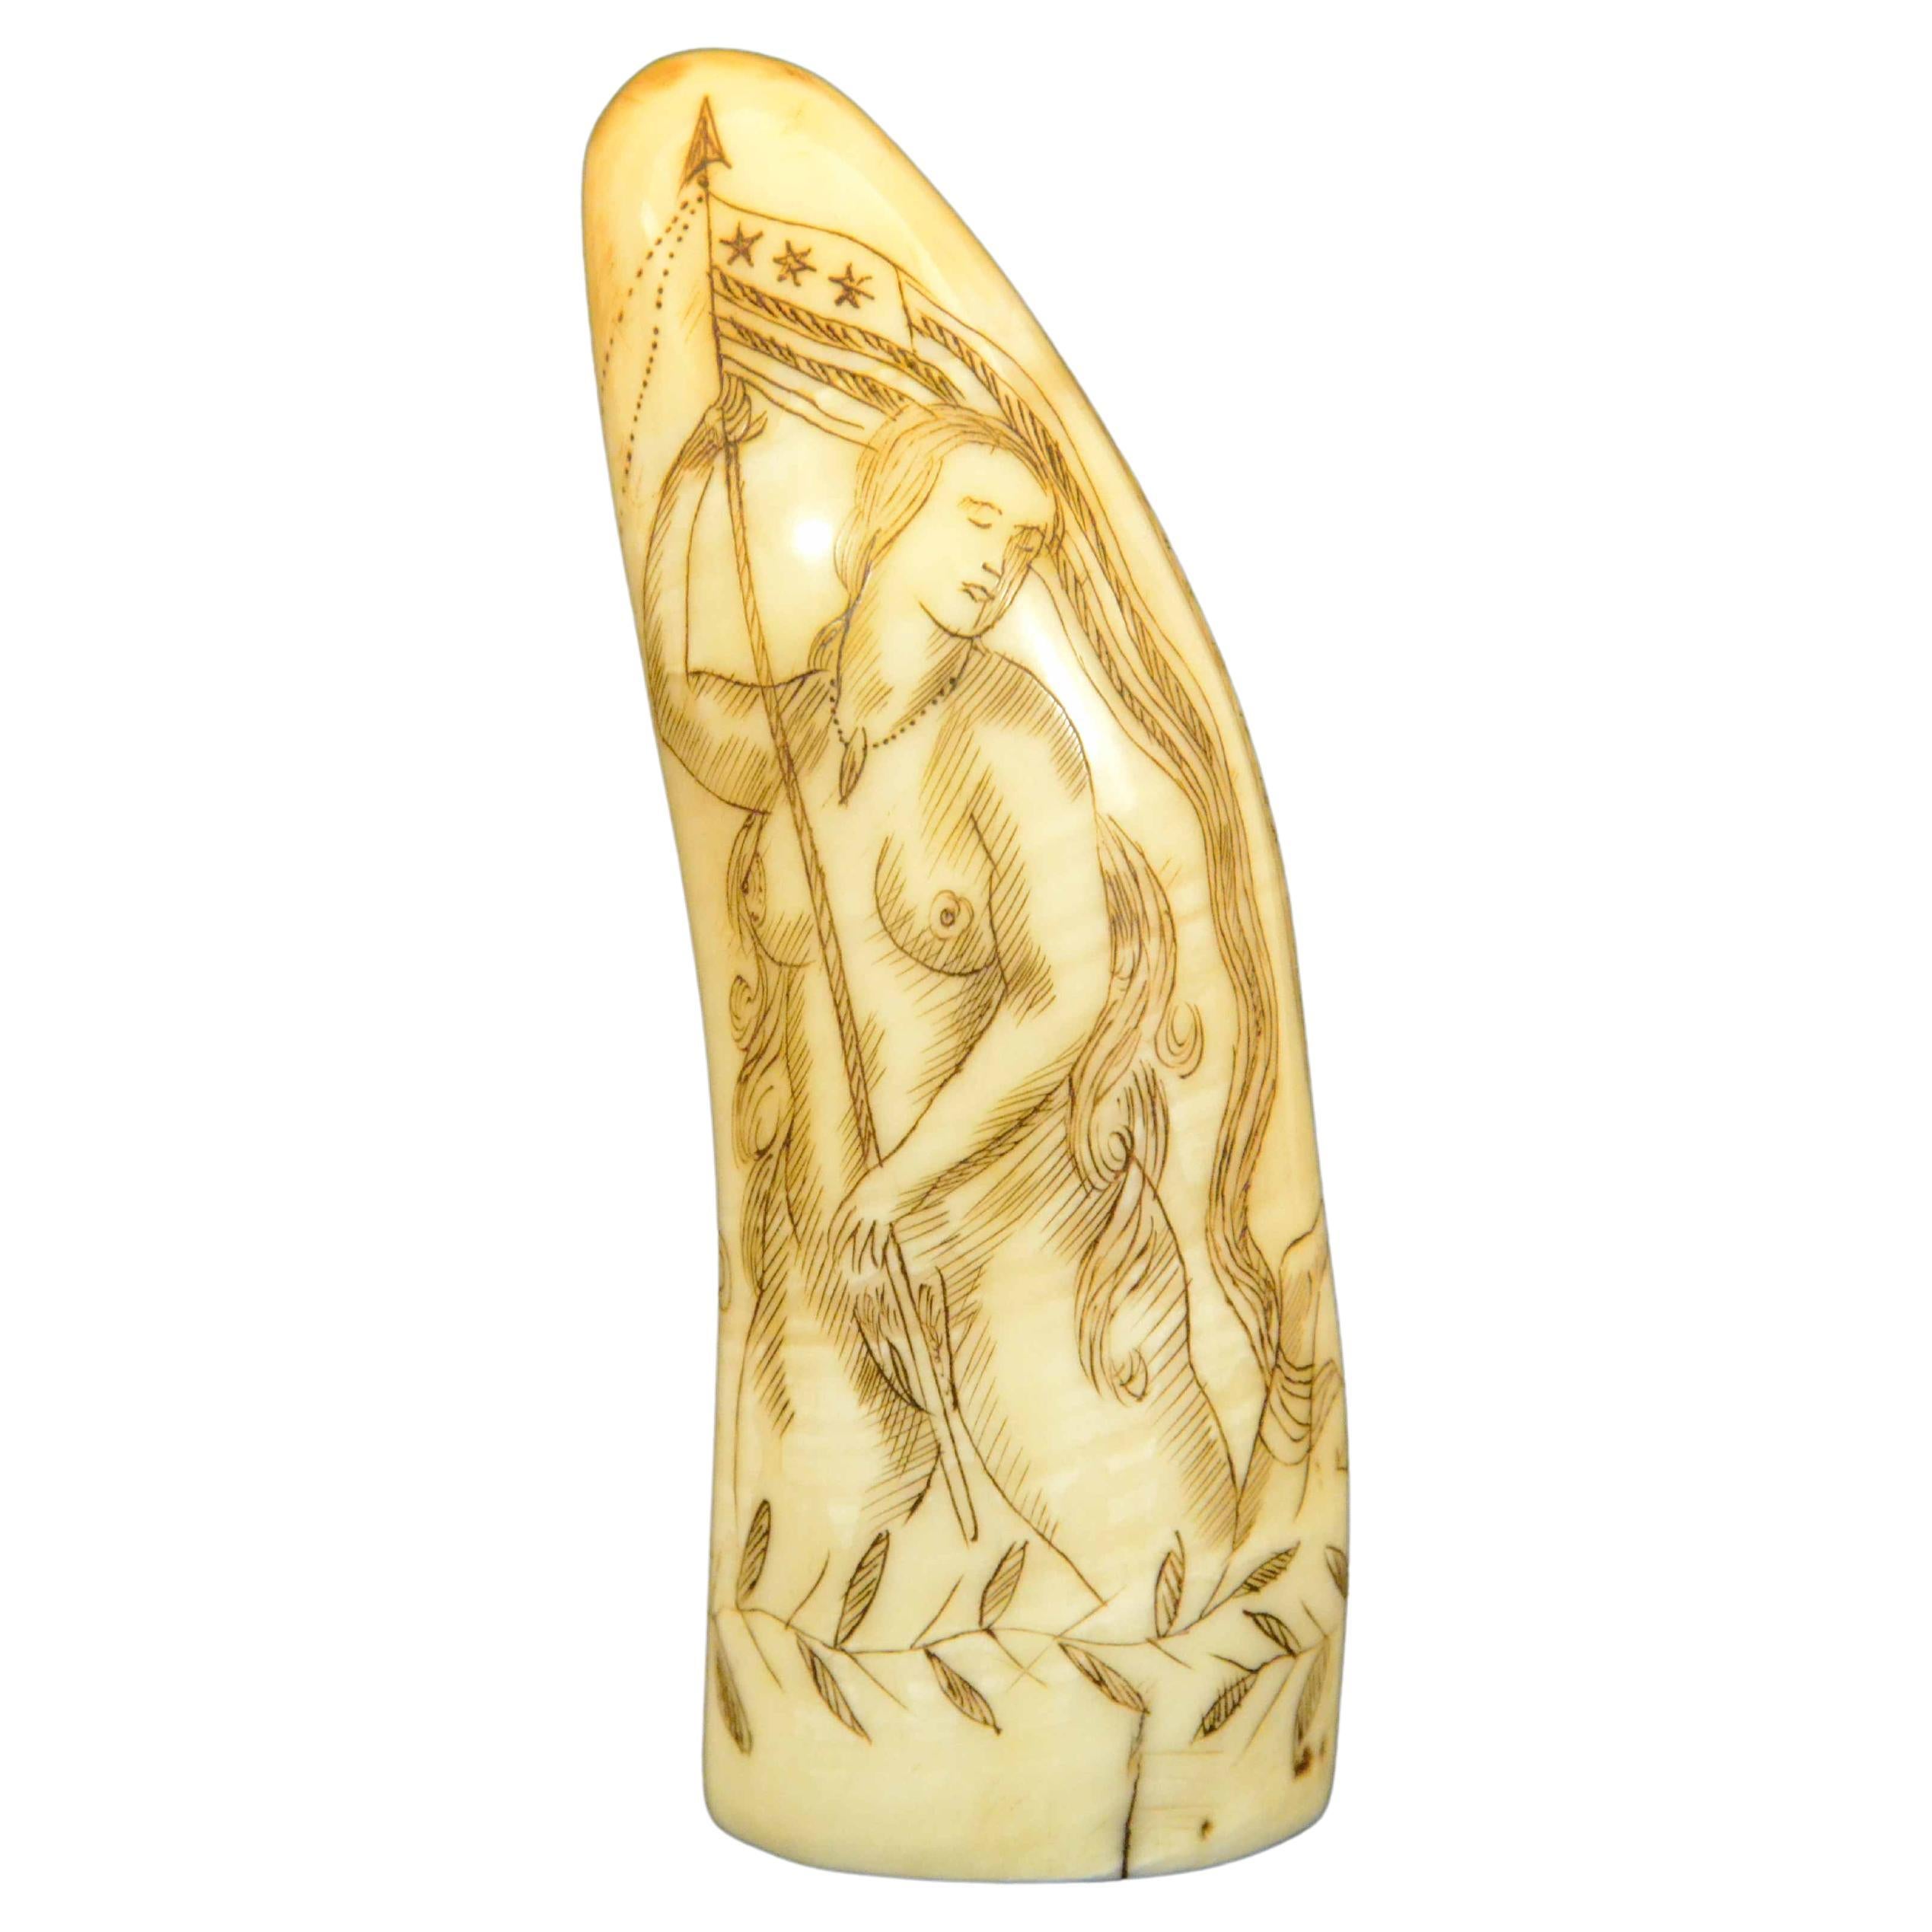 Scrimshaw of engraved whale tooth depicting naked woman with very 1850s face